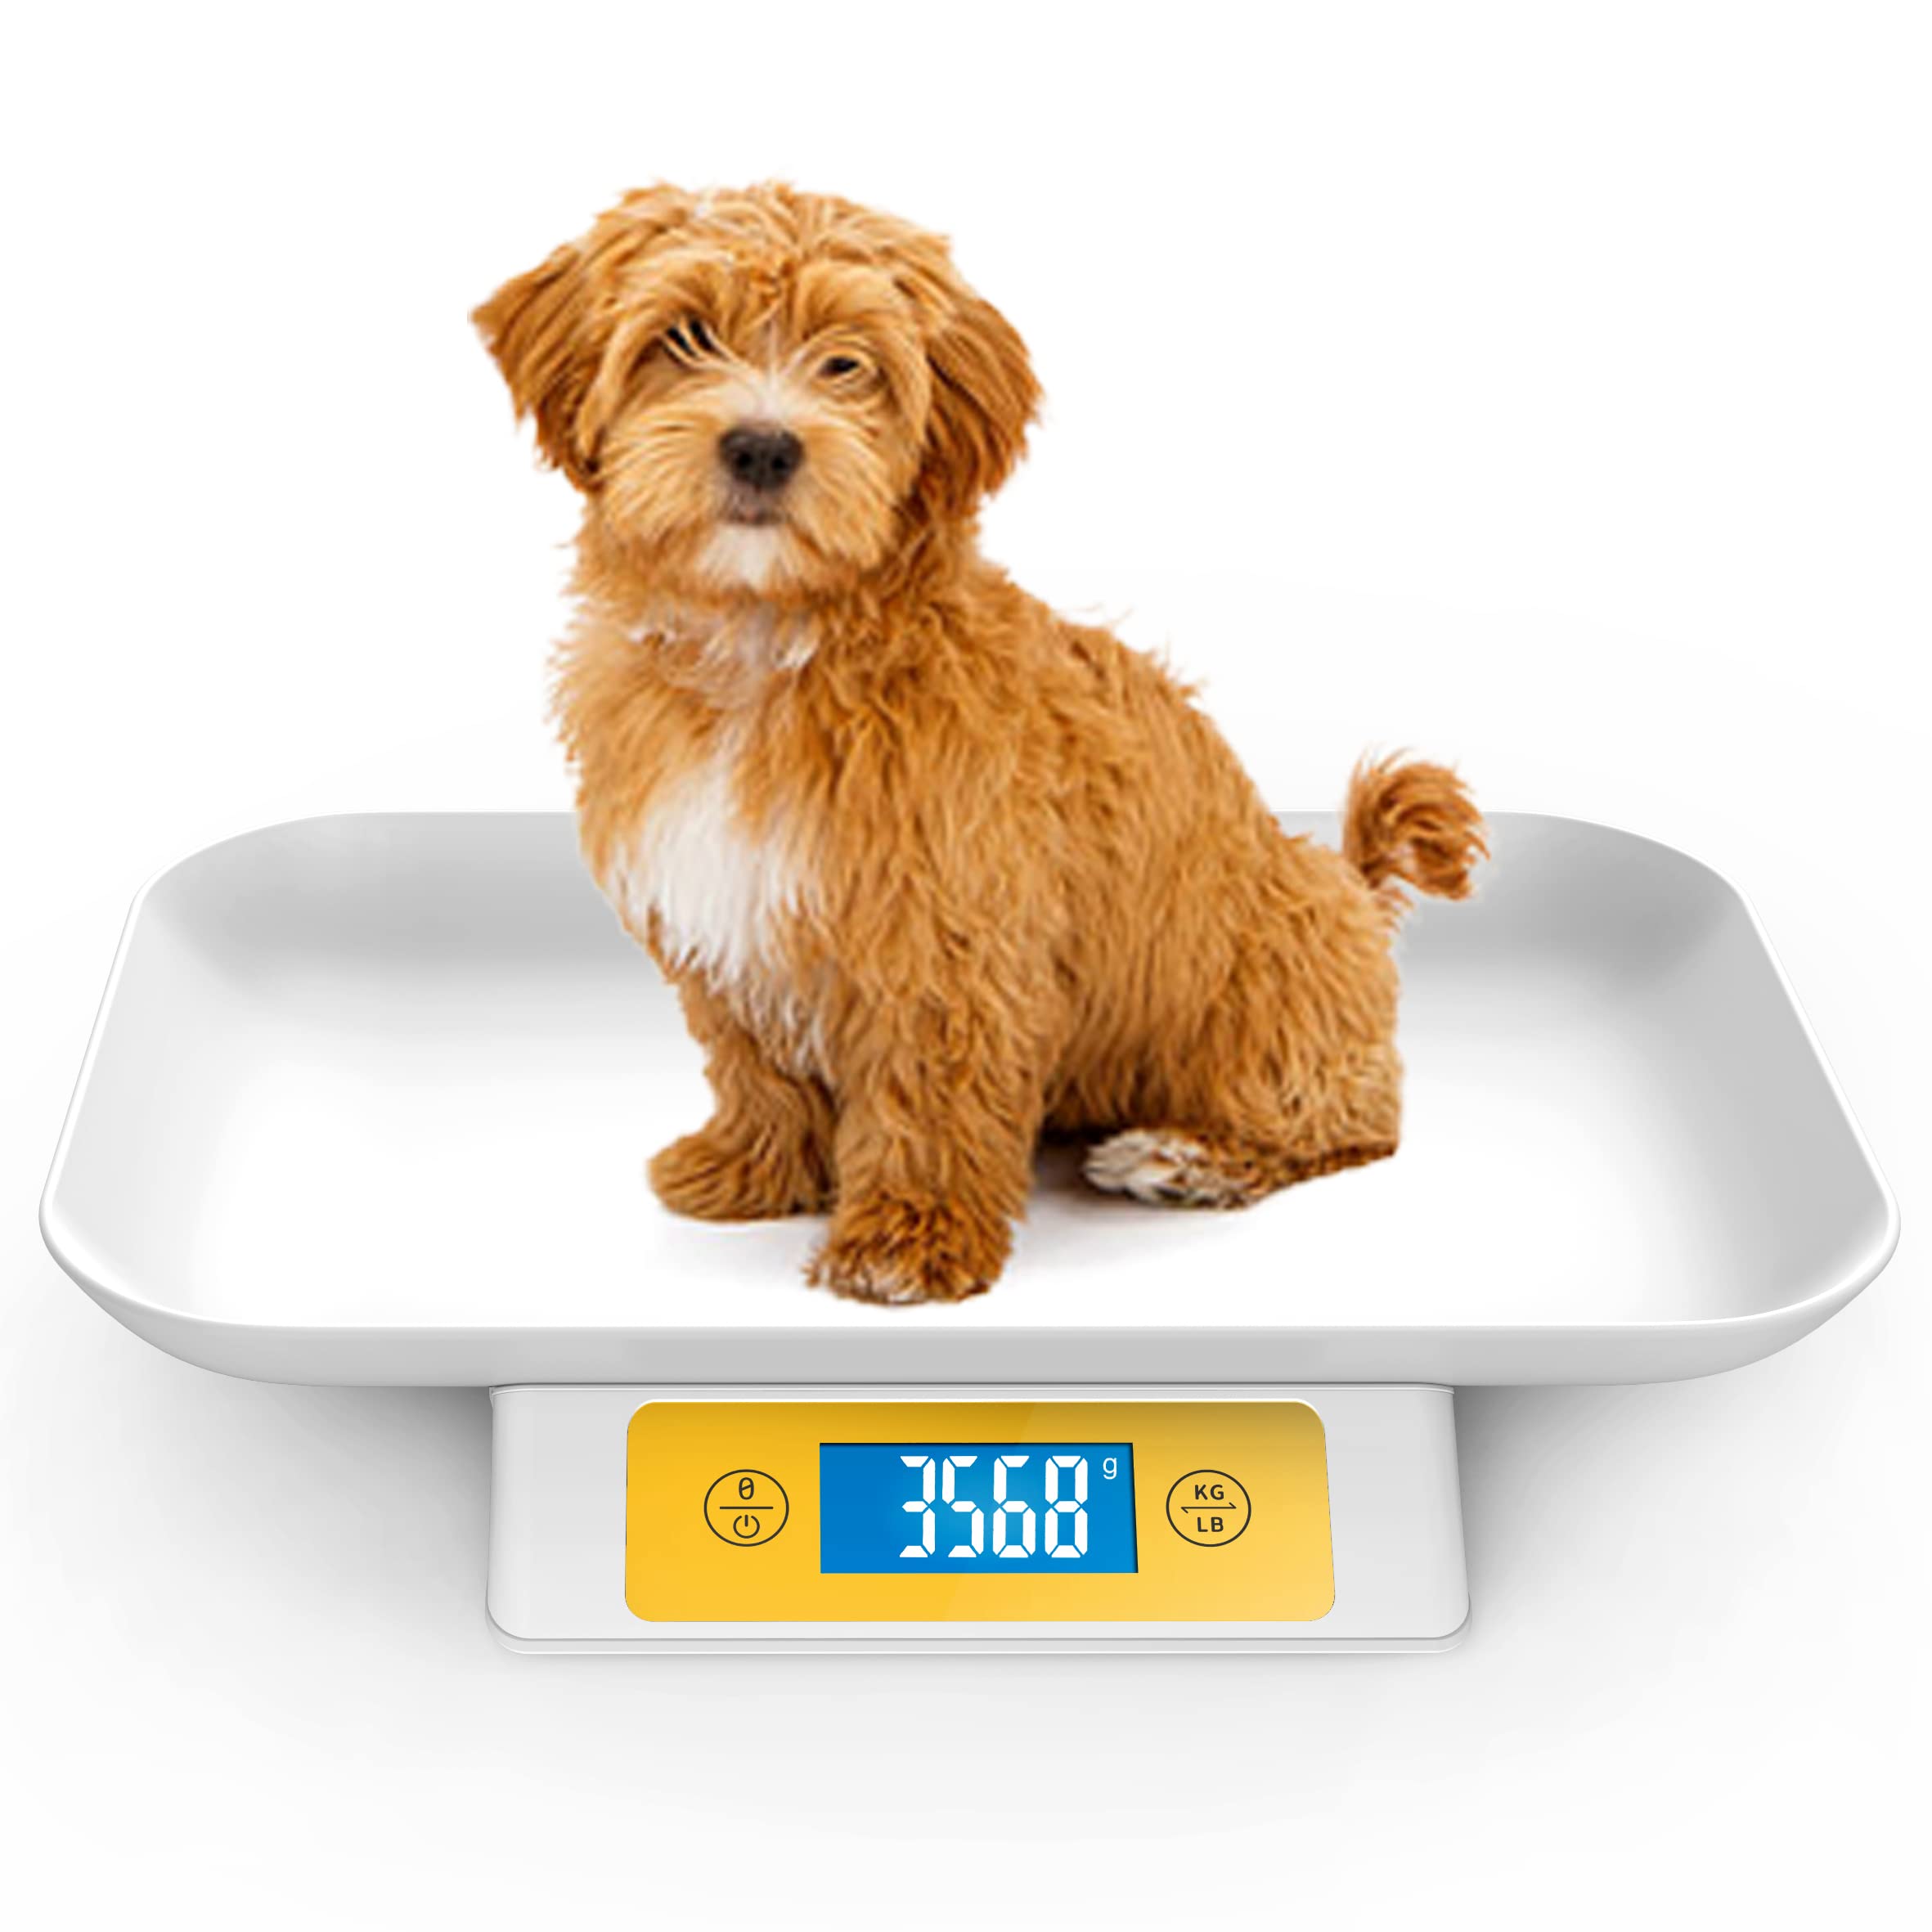 ICARE-PET Digital Pet Scale for Puppy and Cats, Puppy Whelping Supplies Scale, Weigh Capacity 33 lbs (0.03oz), Removable Tray Size 13.4 x